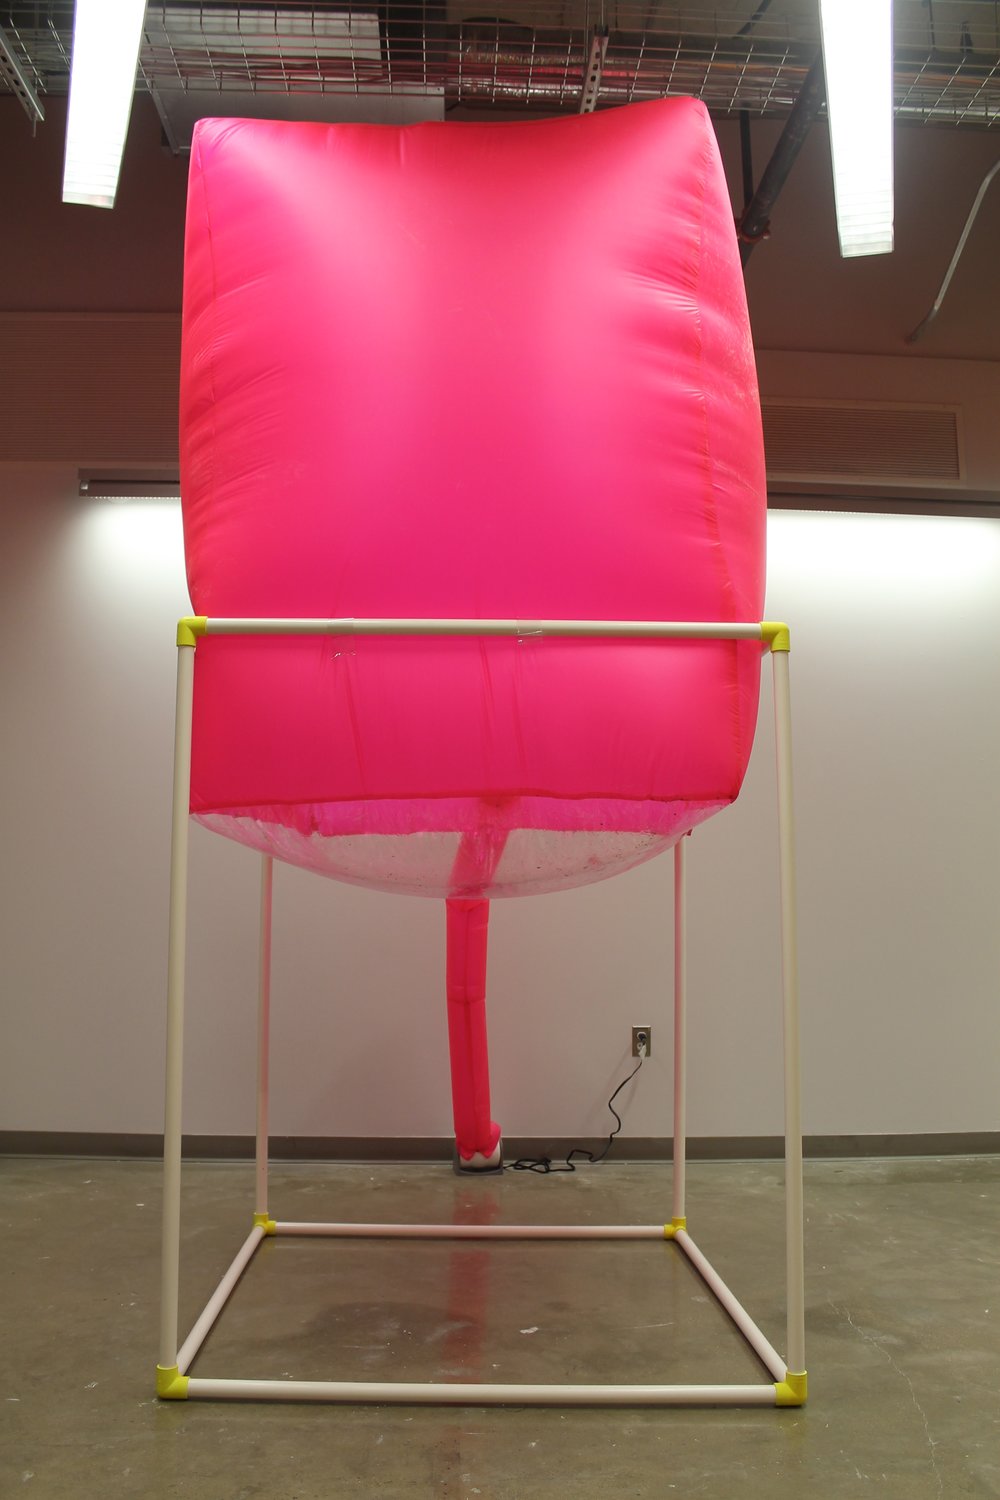 Image: a large pink inflated cube sits atop a white PVC structure. "Negotiating Space: Othered by Design" by Bri Beck, courtesy of the artist.